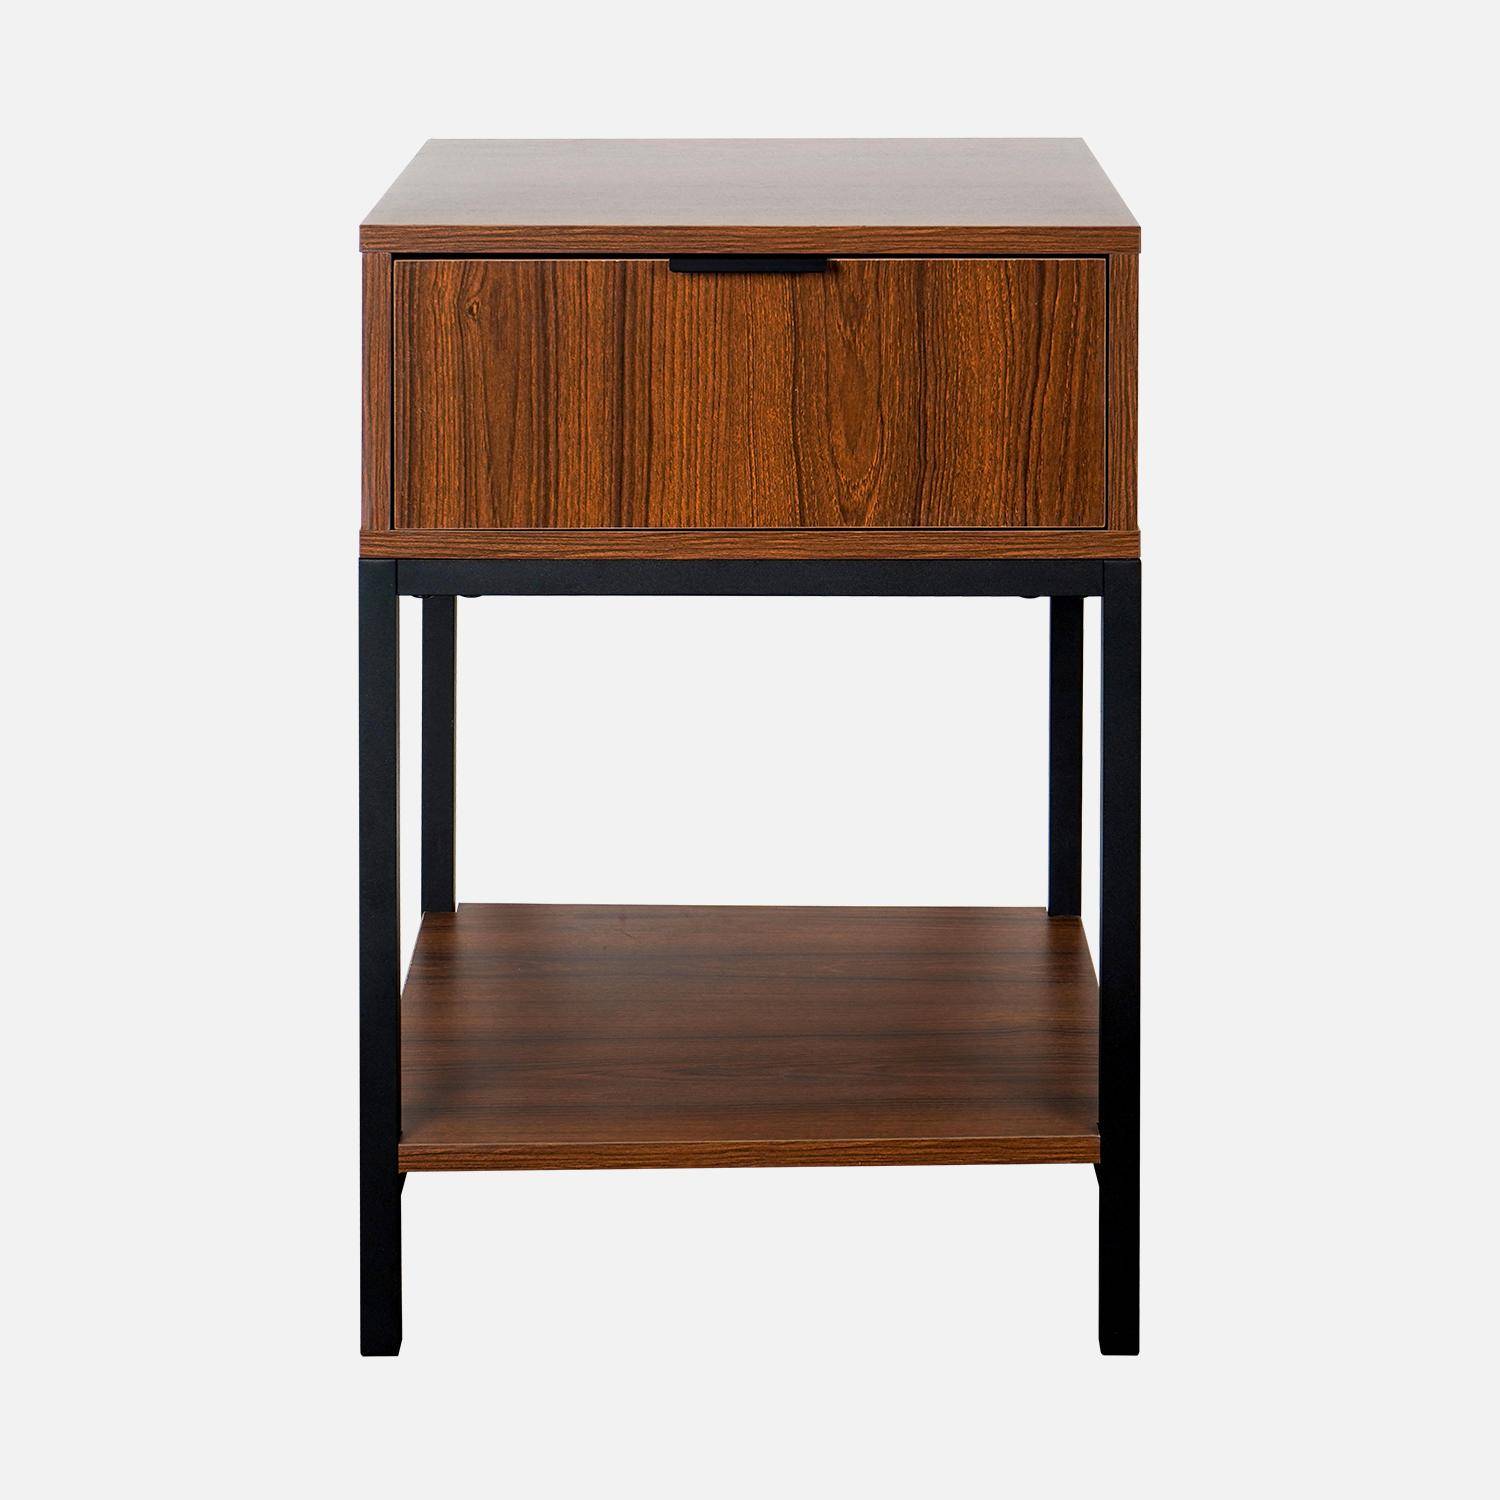 Walnut-coloured bedside table with black metal legs and handle - 1 drawer and 1 shelf,sweeek,Photo3